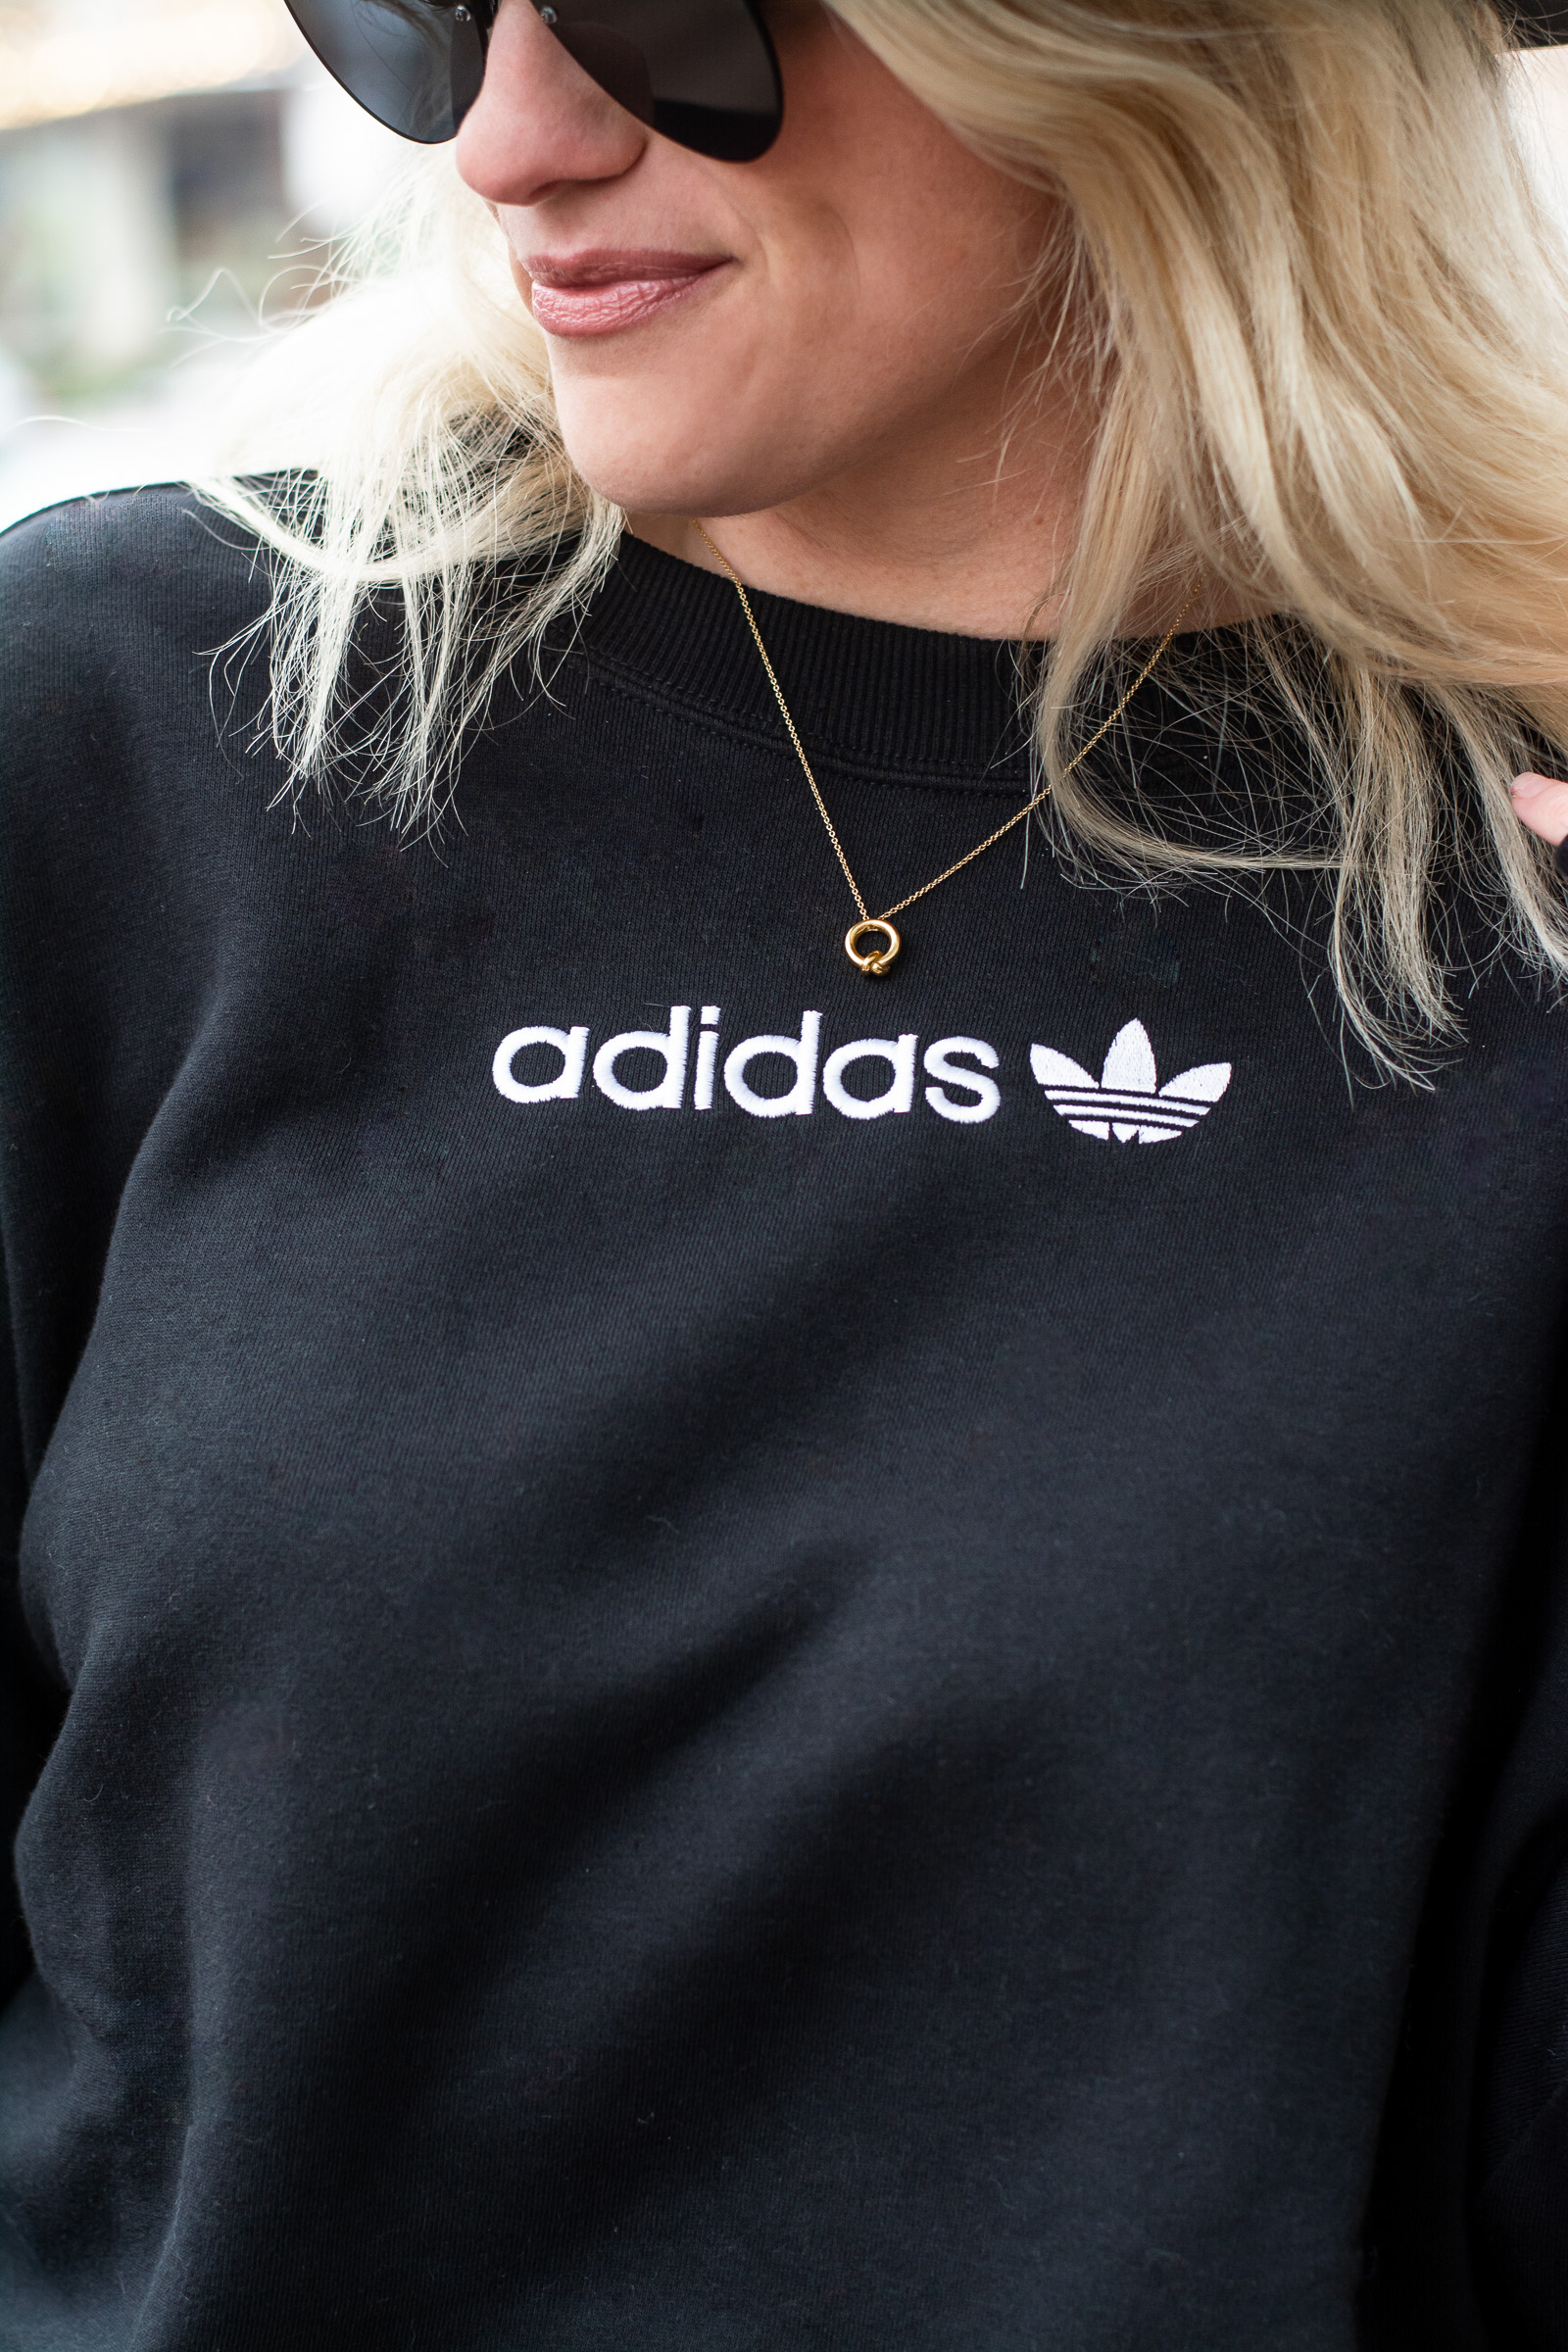 Street Style with adidas. | Ash from LSR